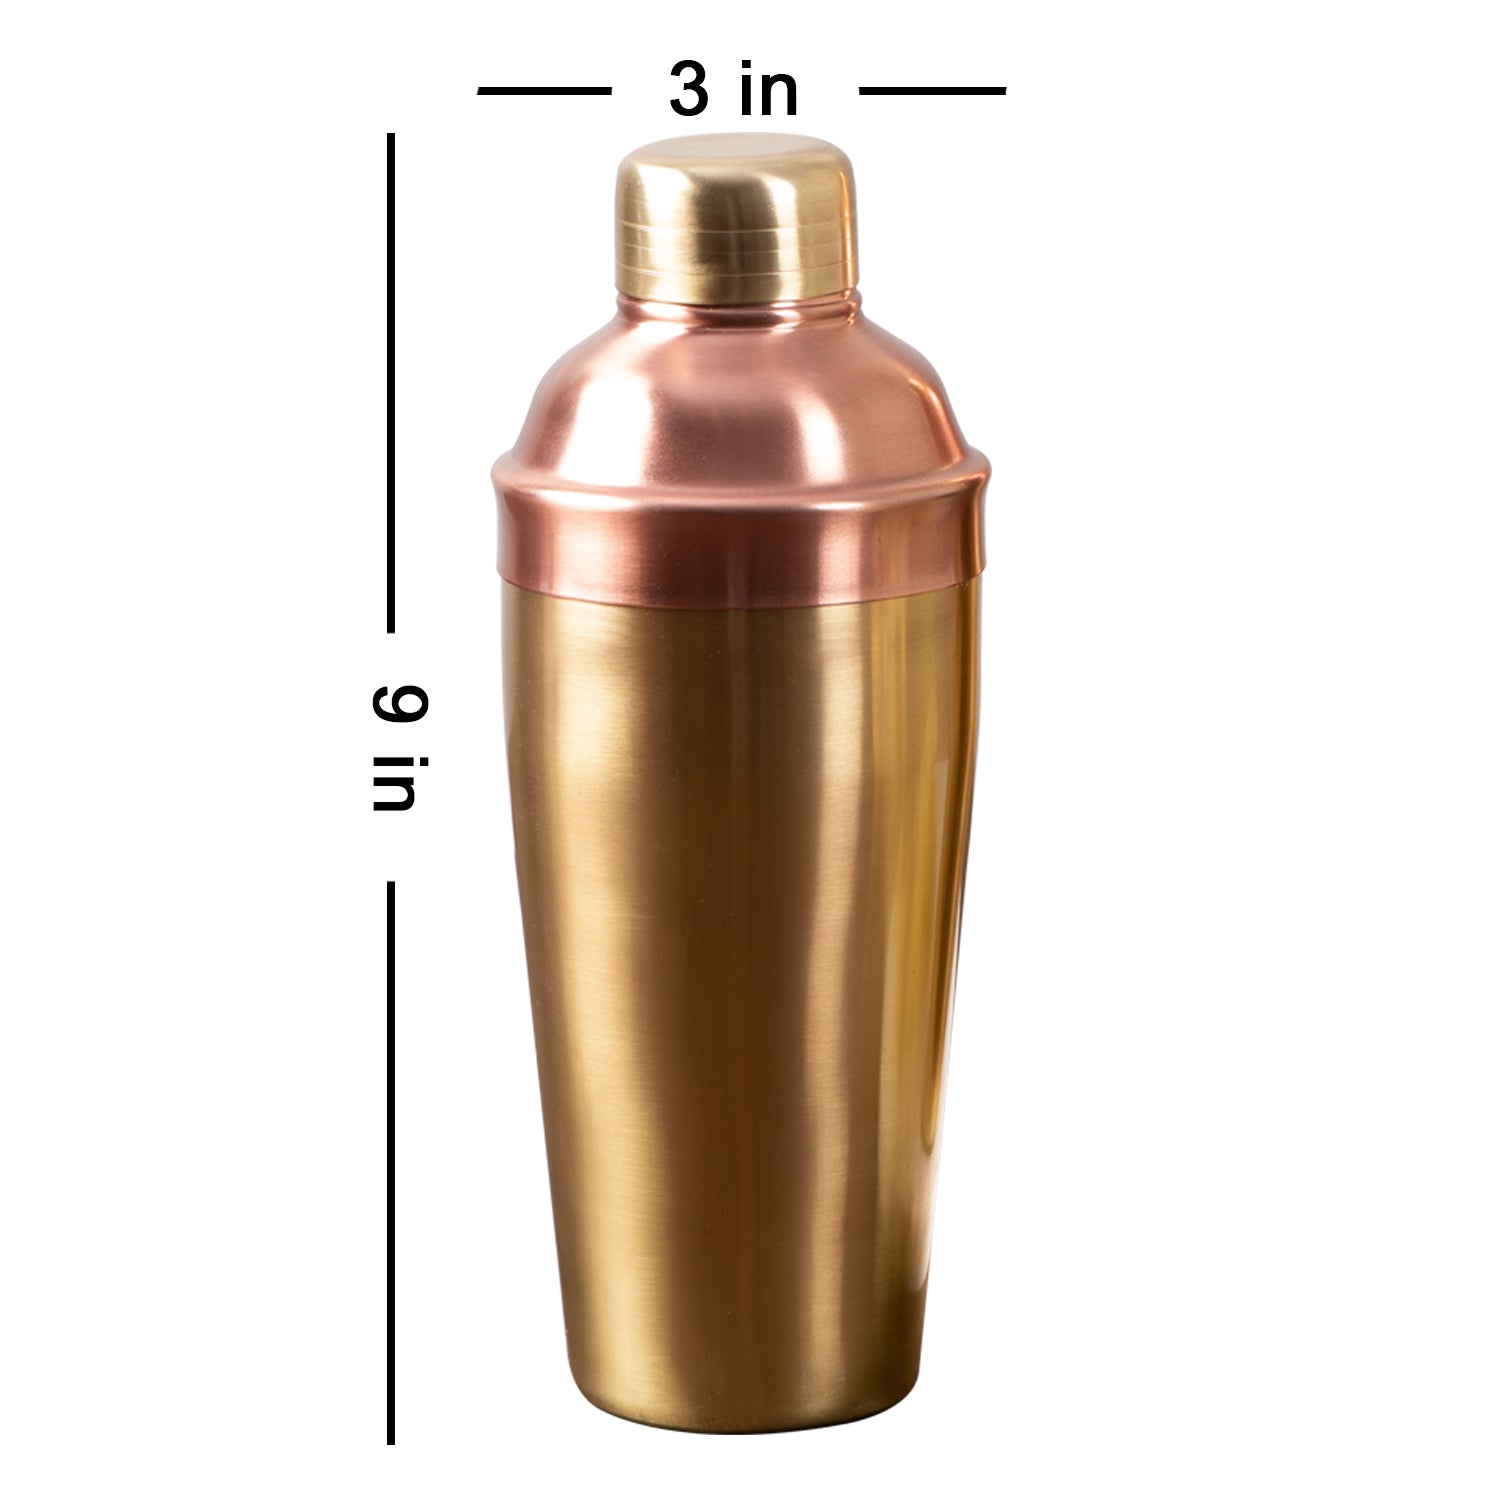 gold cocktail shaker glass